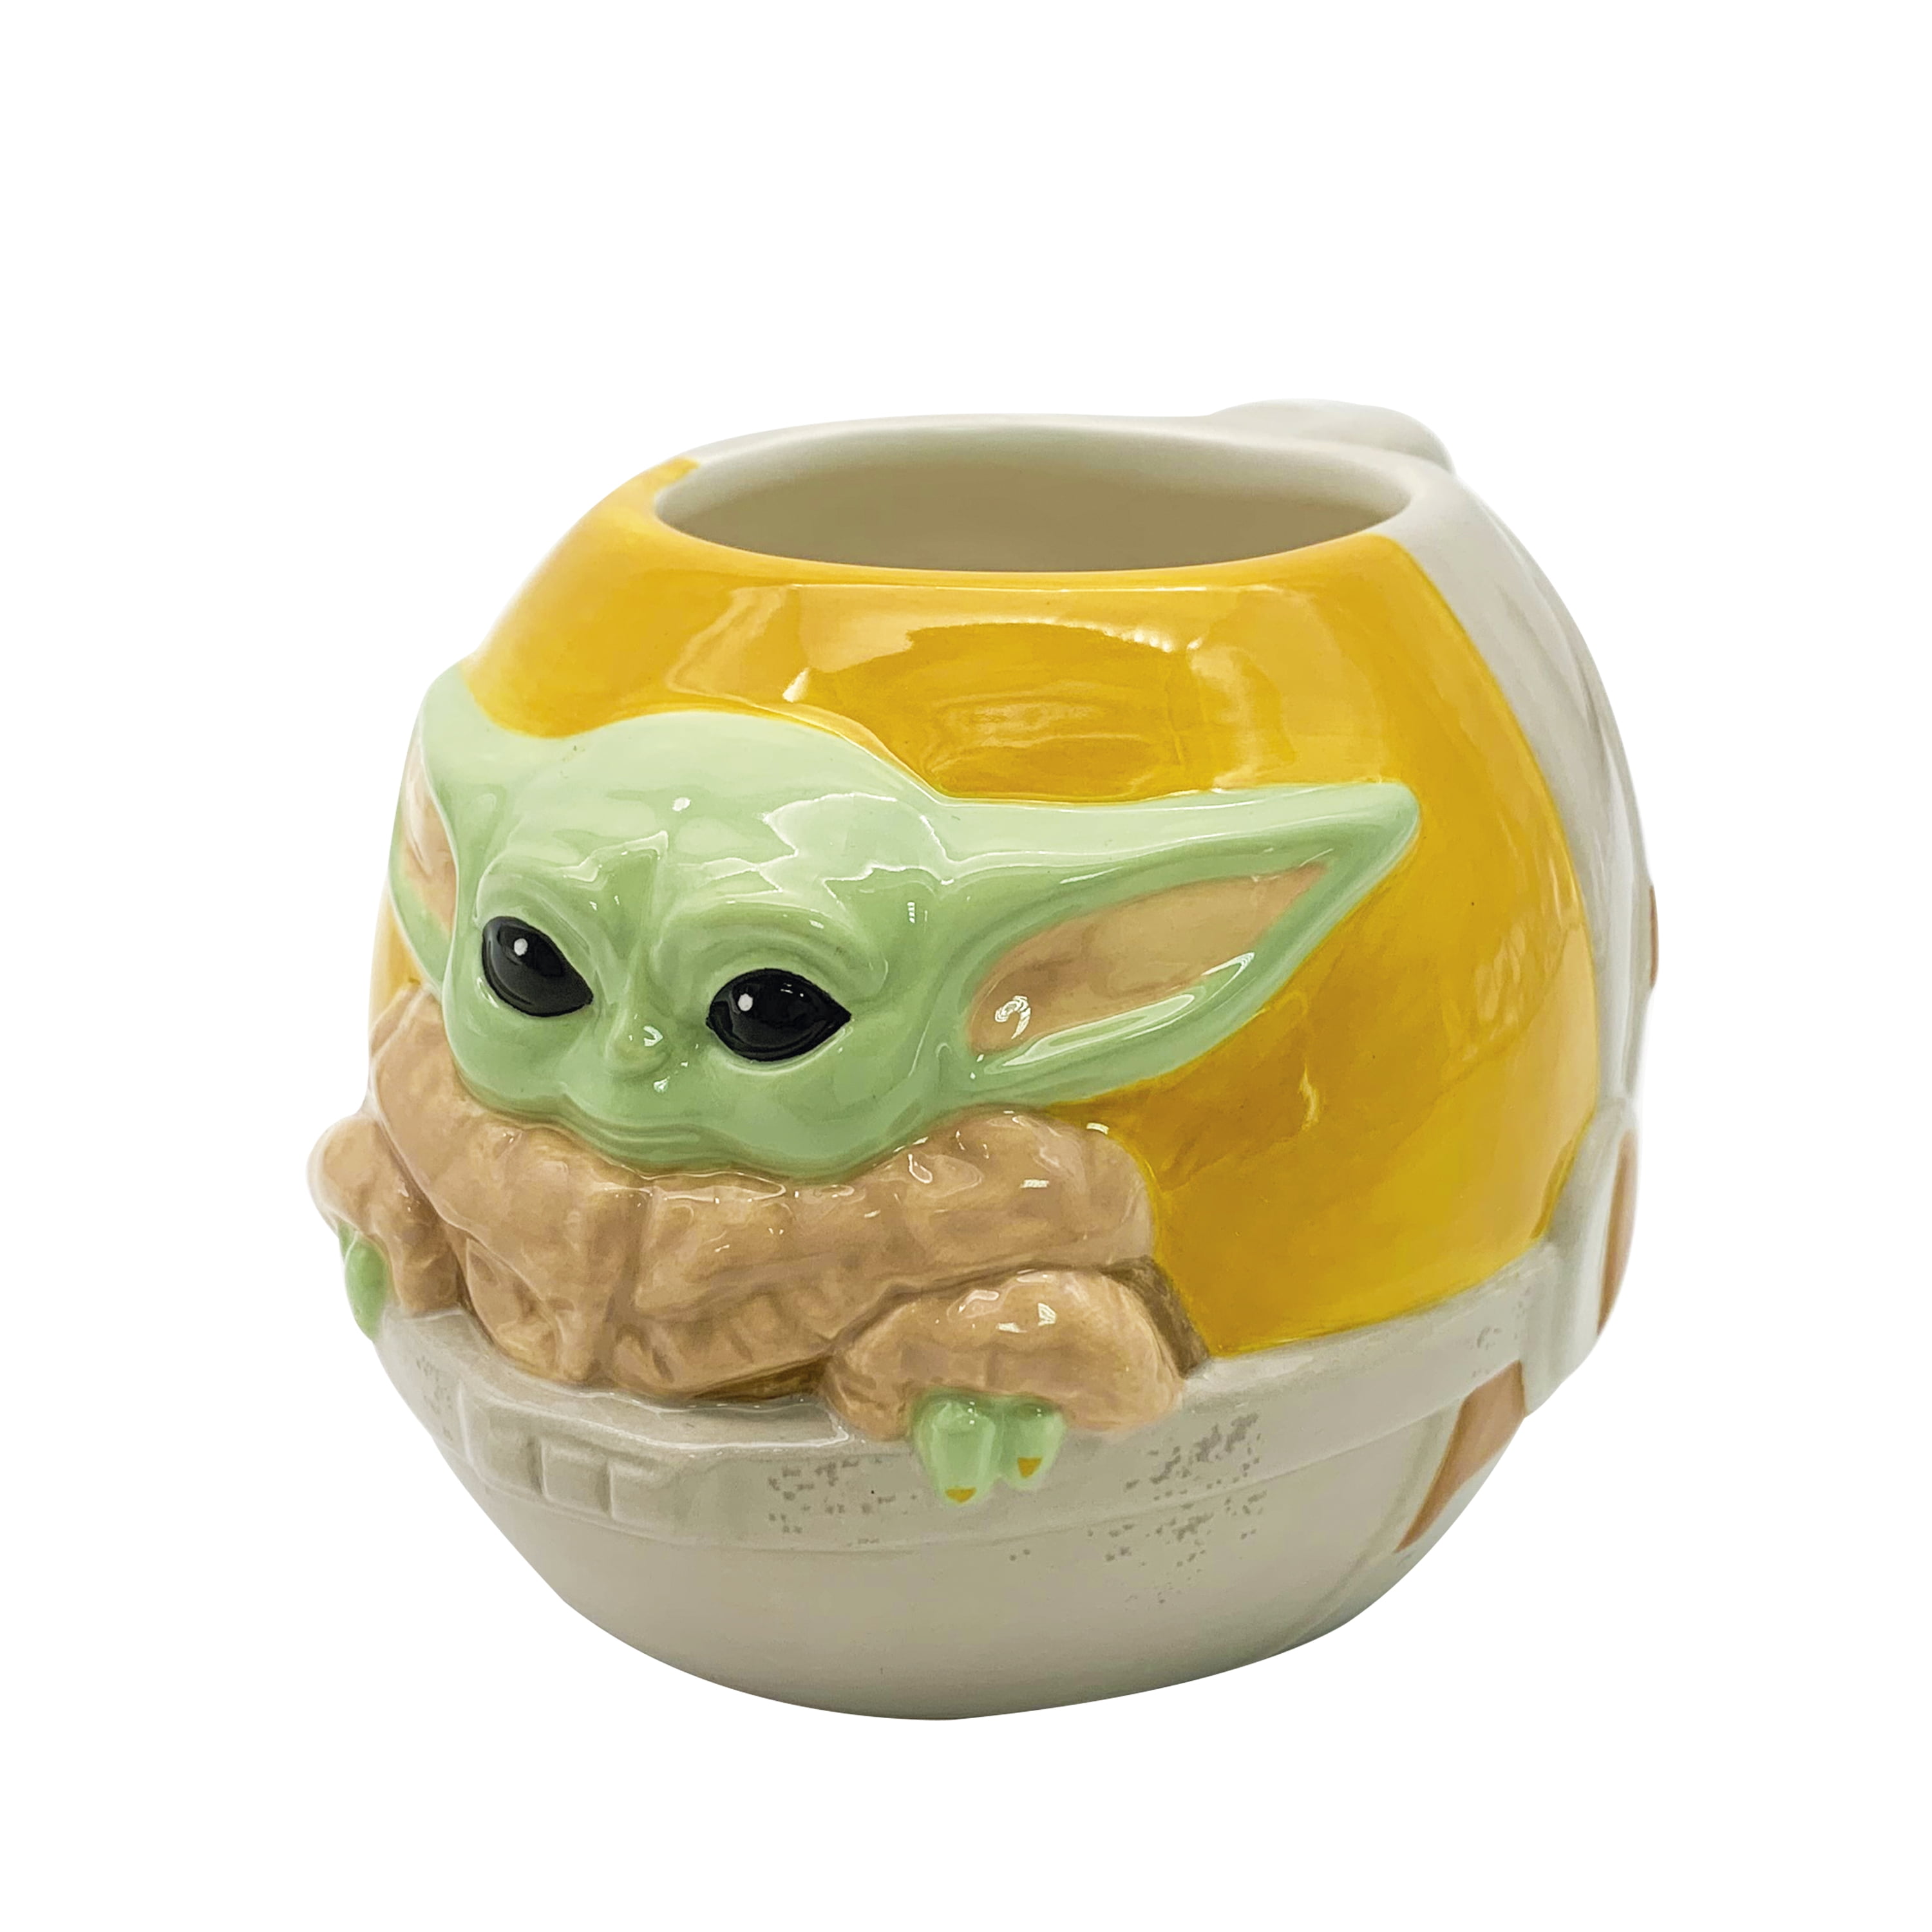 Details about   Star Wars Mandalorian The Child Baby Yoda Figure 3D Storage Cube Toy Box Decor